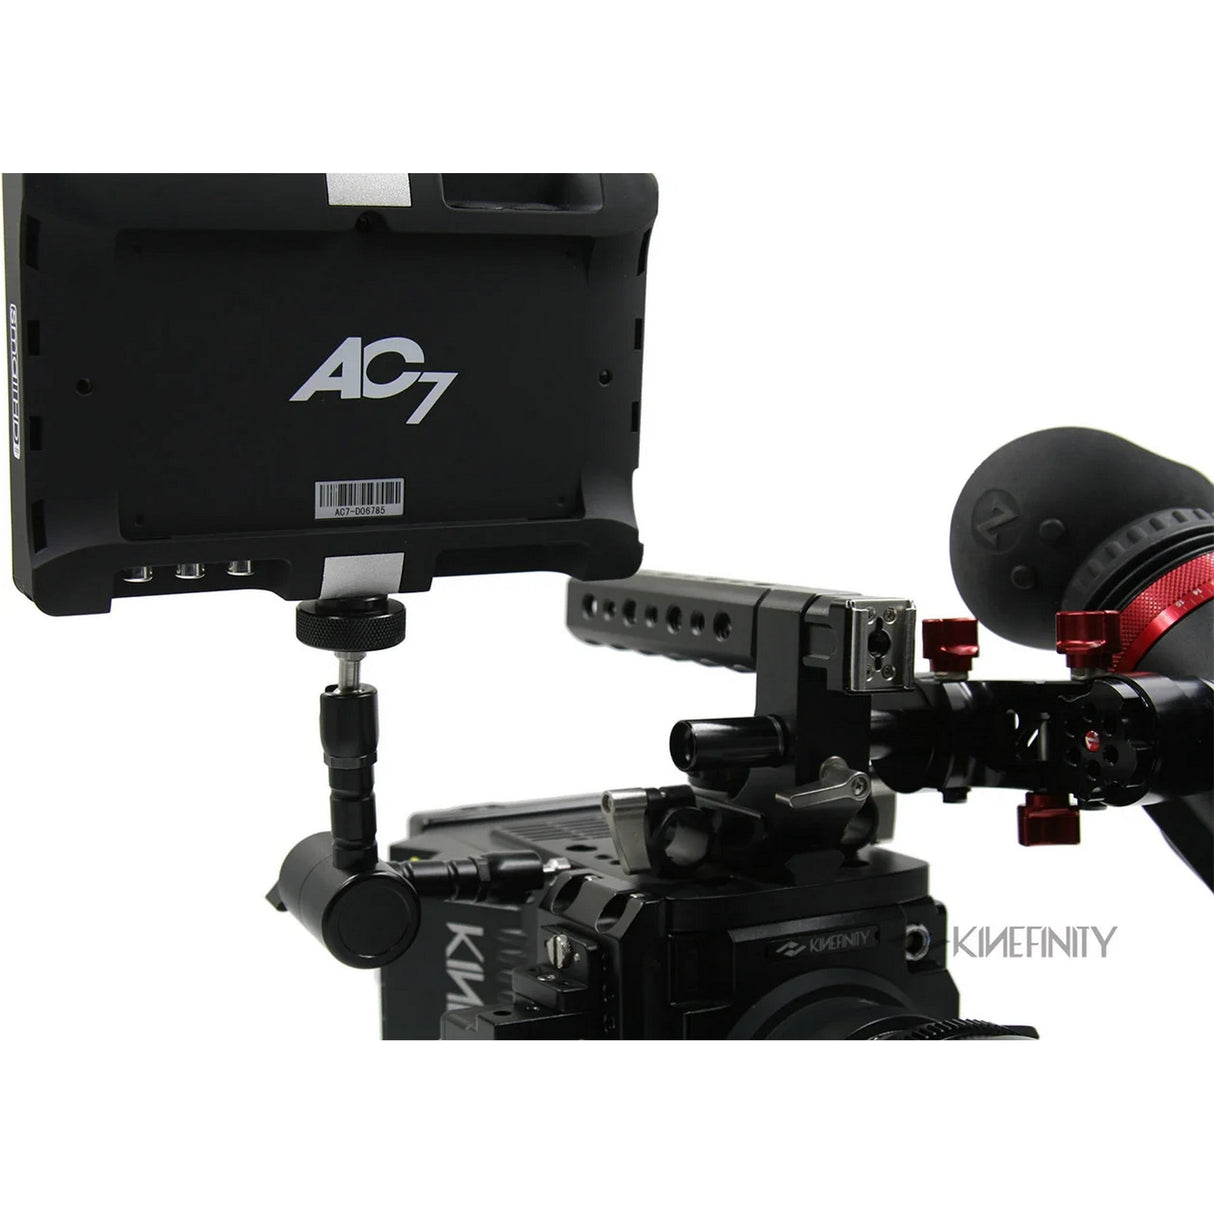 Kinefinity 6-Inch Flexible Strong/Articulating Arm